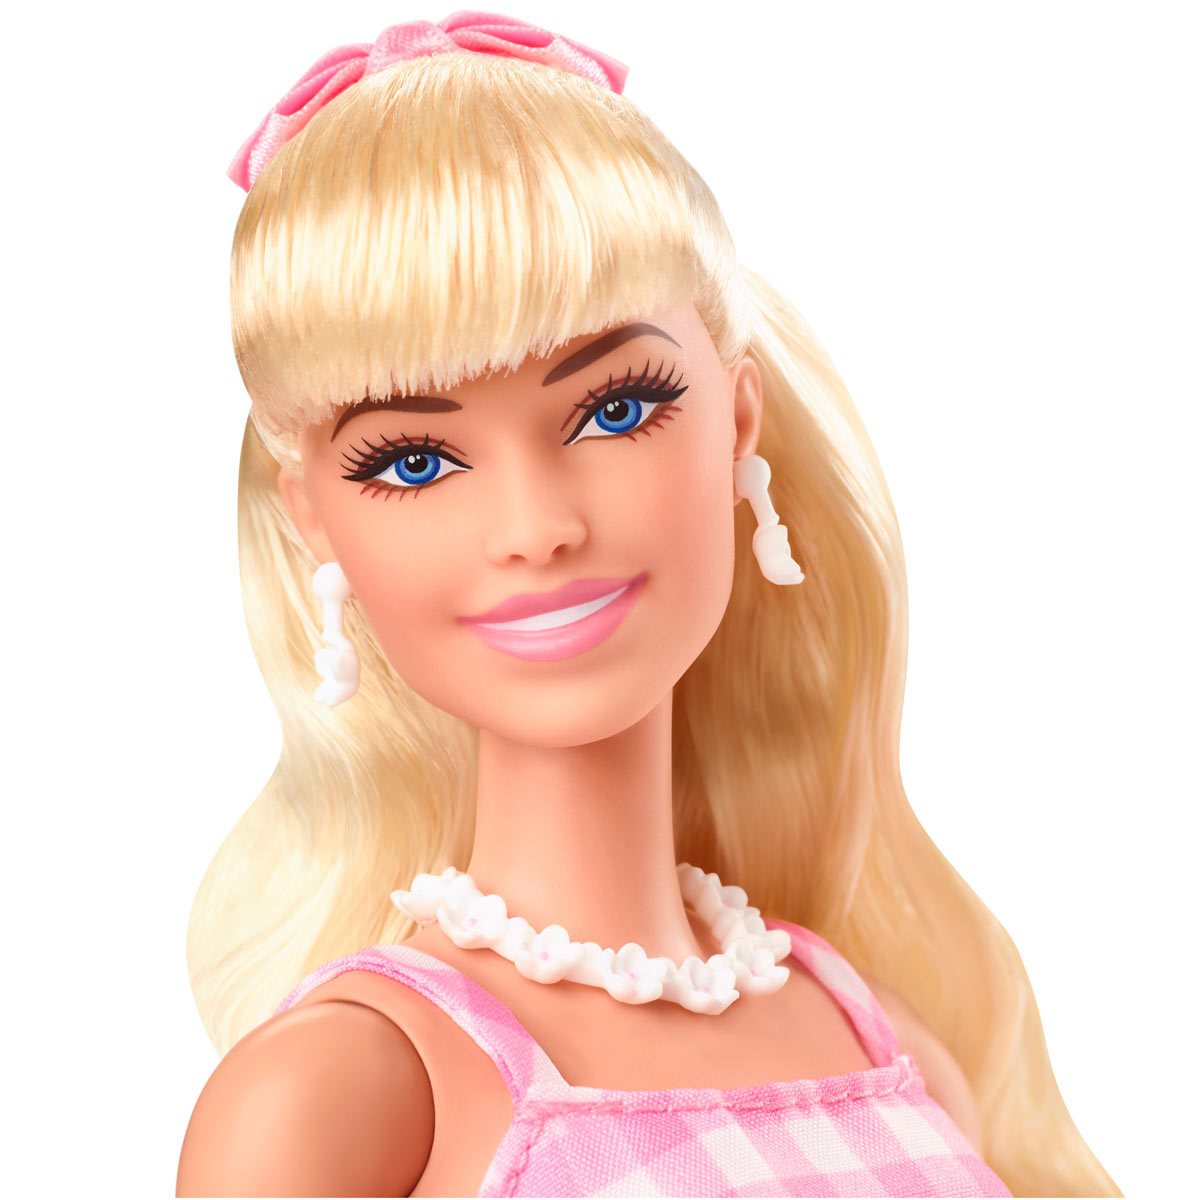 Barbie Movie Doll in Pink Gingham Dress - Entertainment Earth